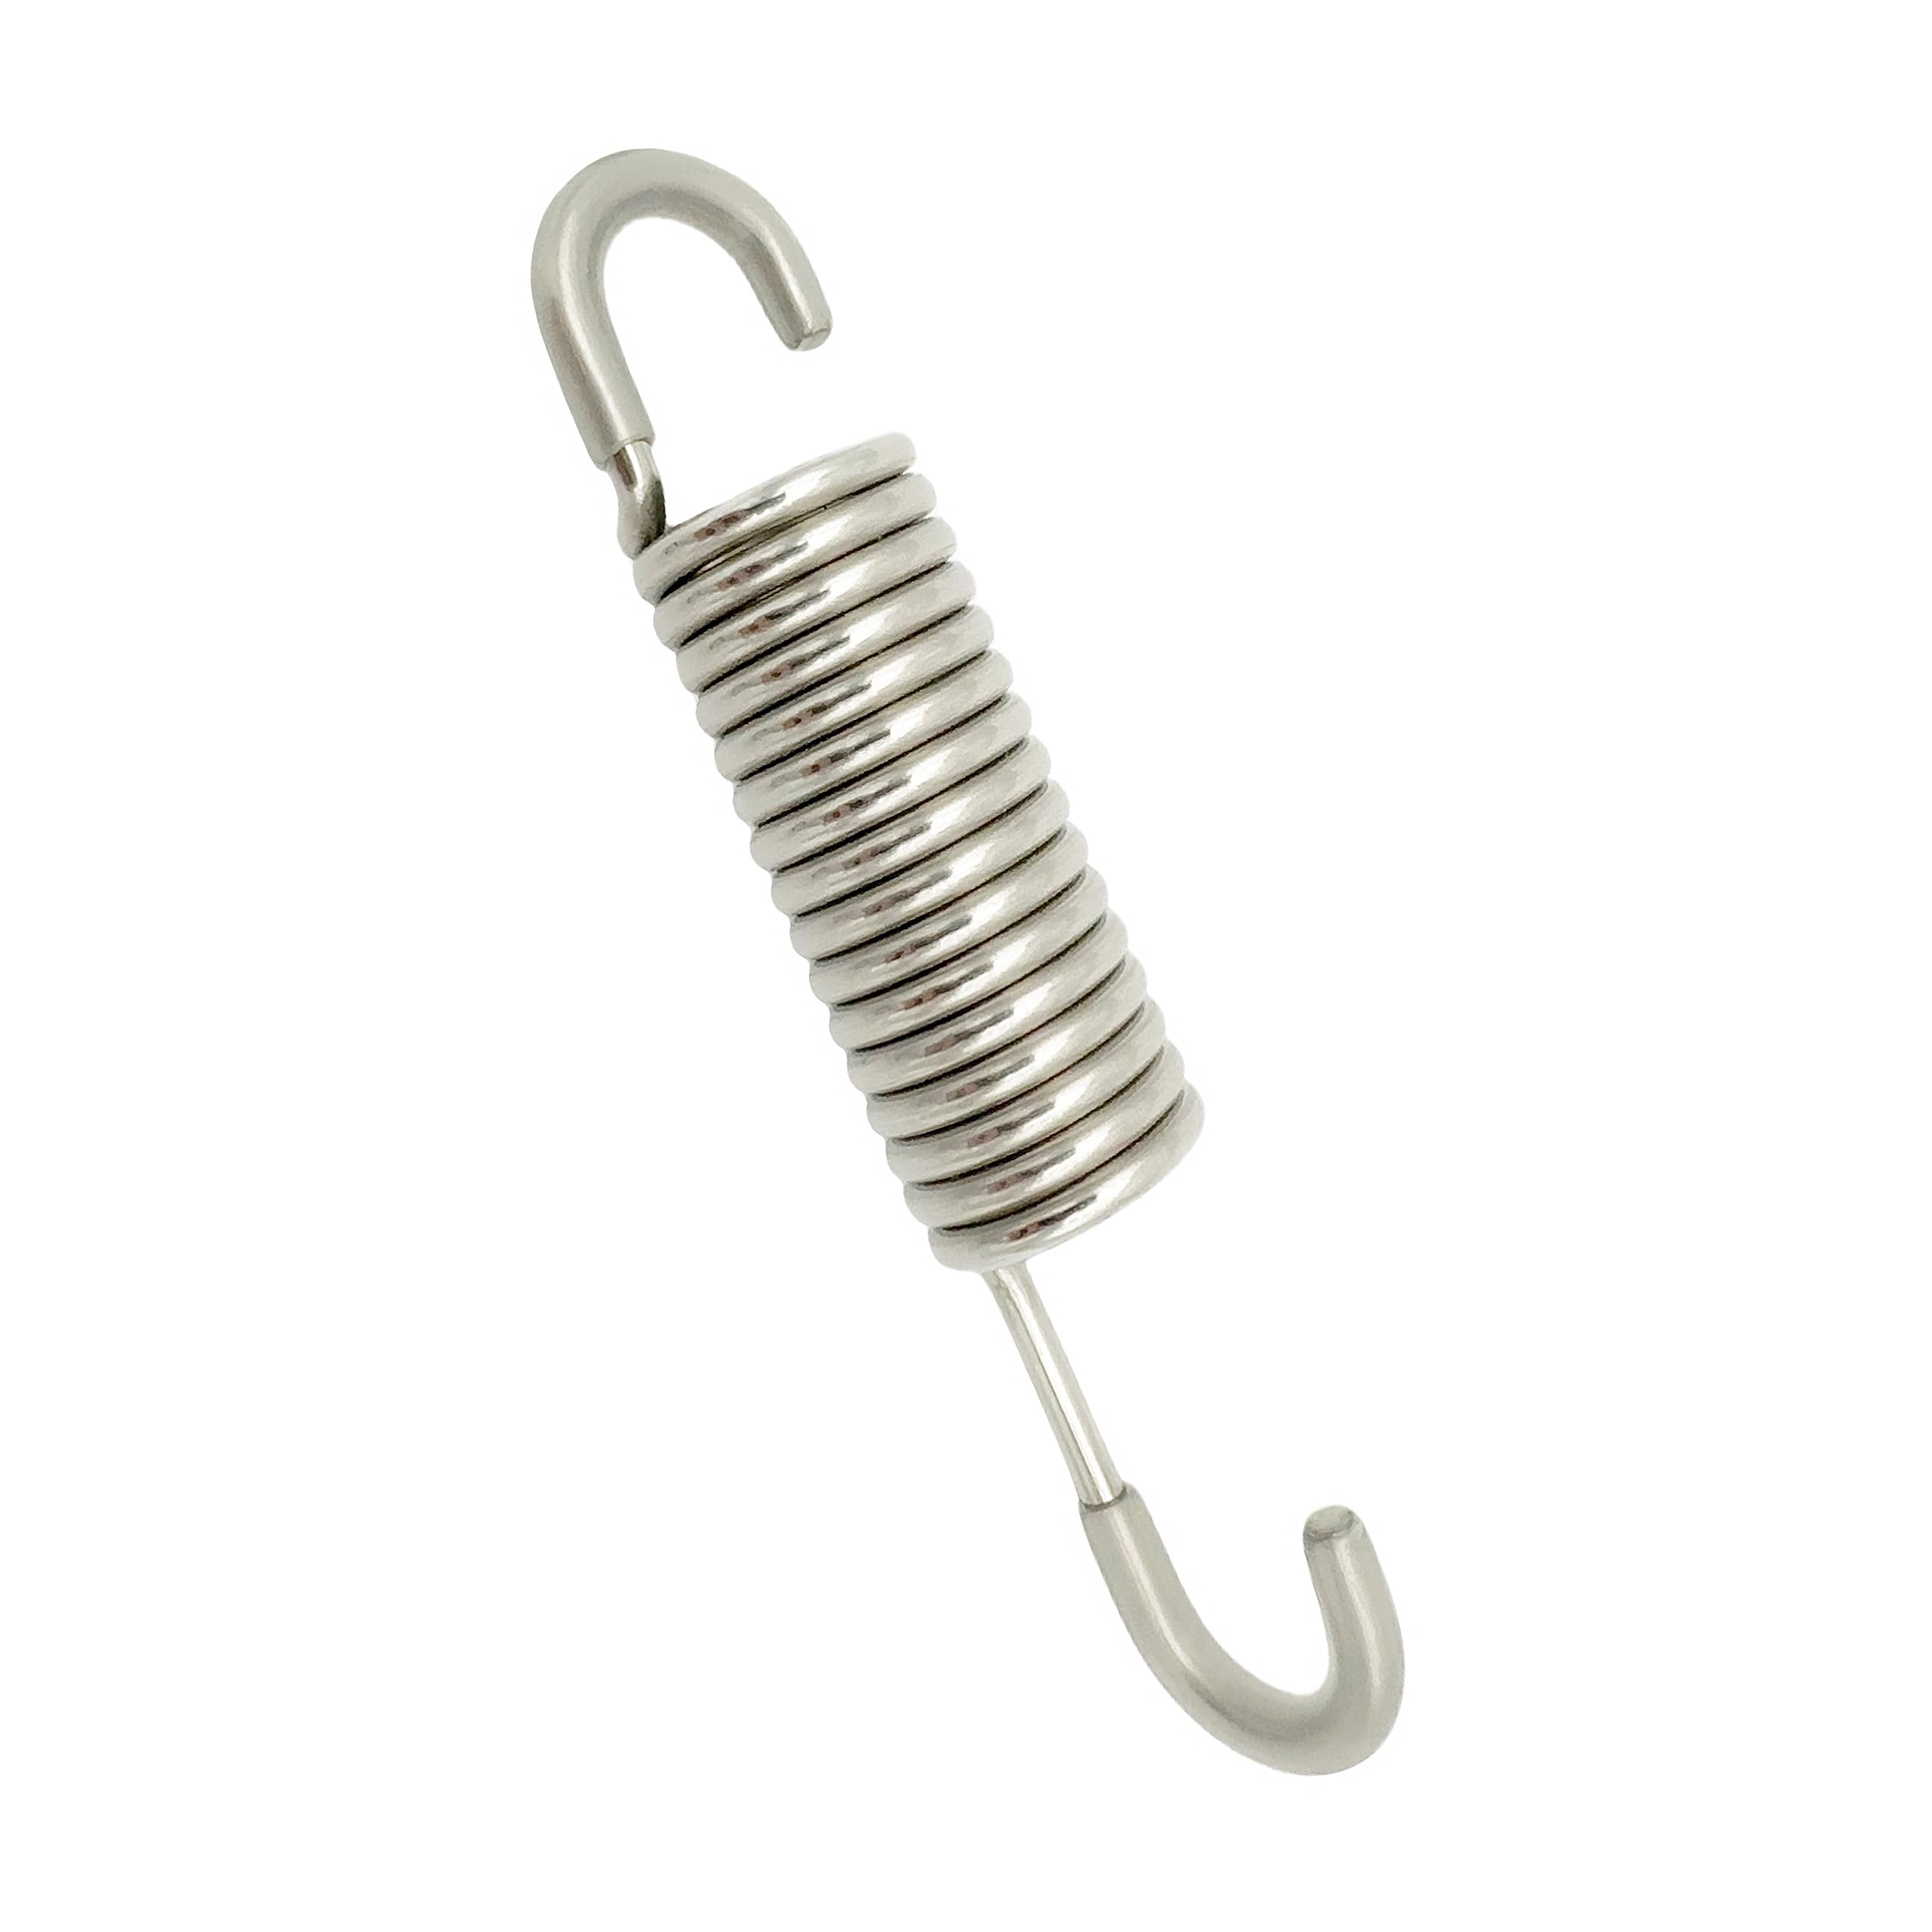 Souldershop 3-5/8 inch Stainless Steel Replacement Recliner Chair Mechanism Furniture Tension Springs Long Neck Style 2.5mm Wire Thickness [3.33'' Inside Hook to Hook] (Pack of 2)